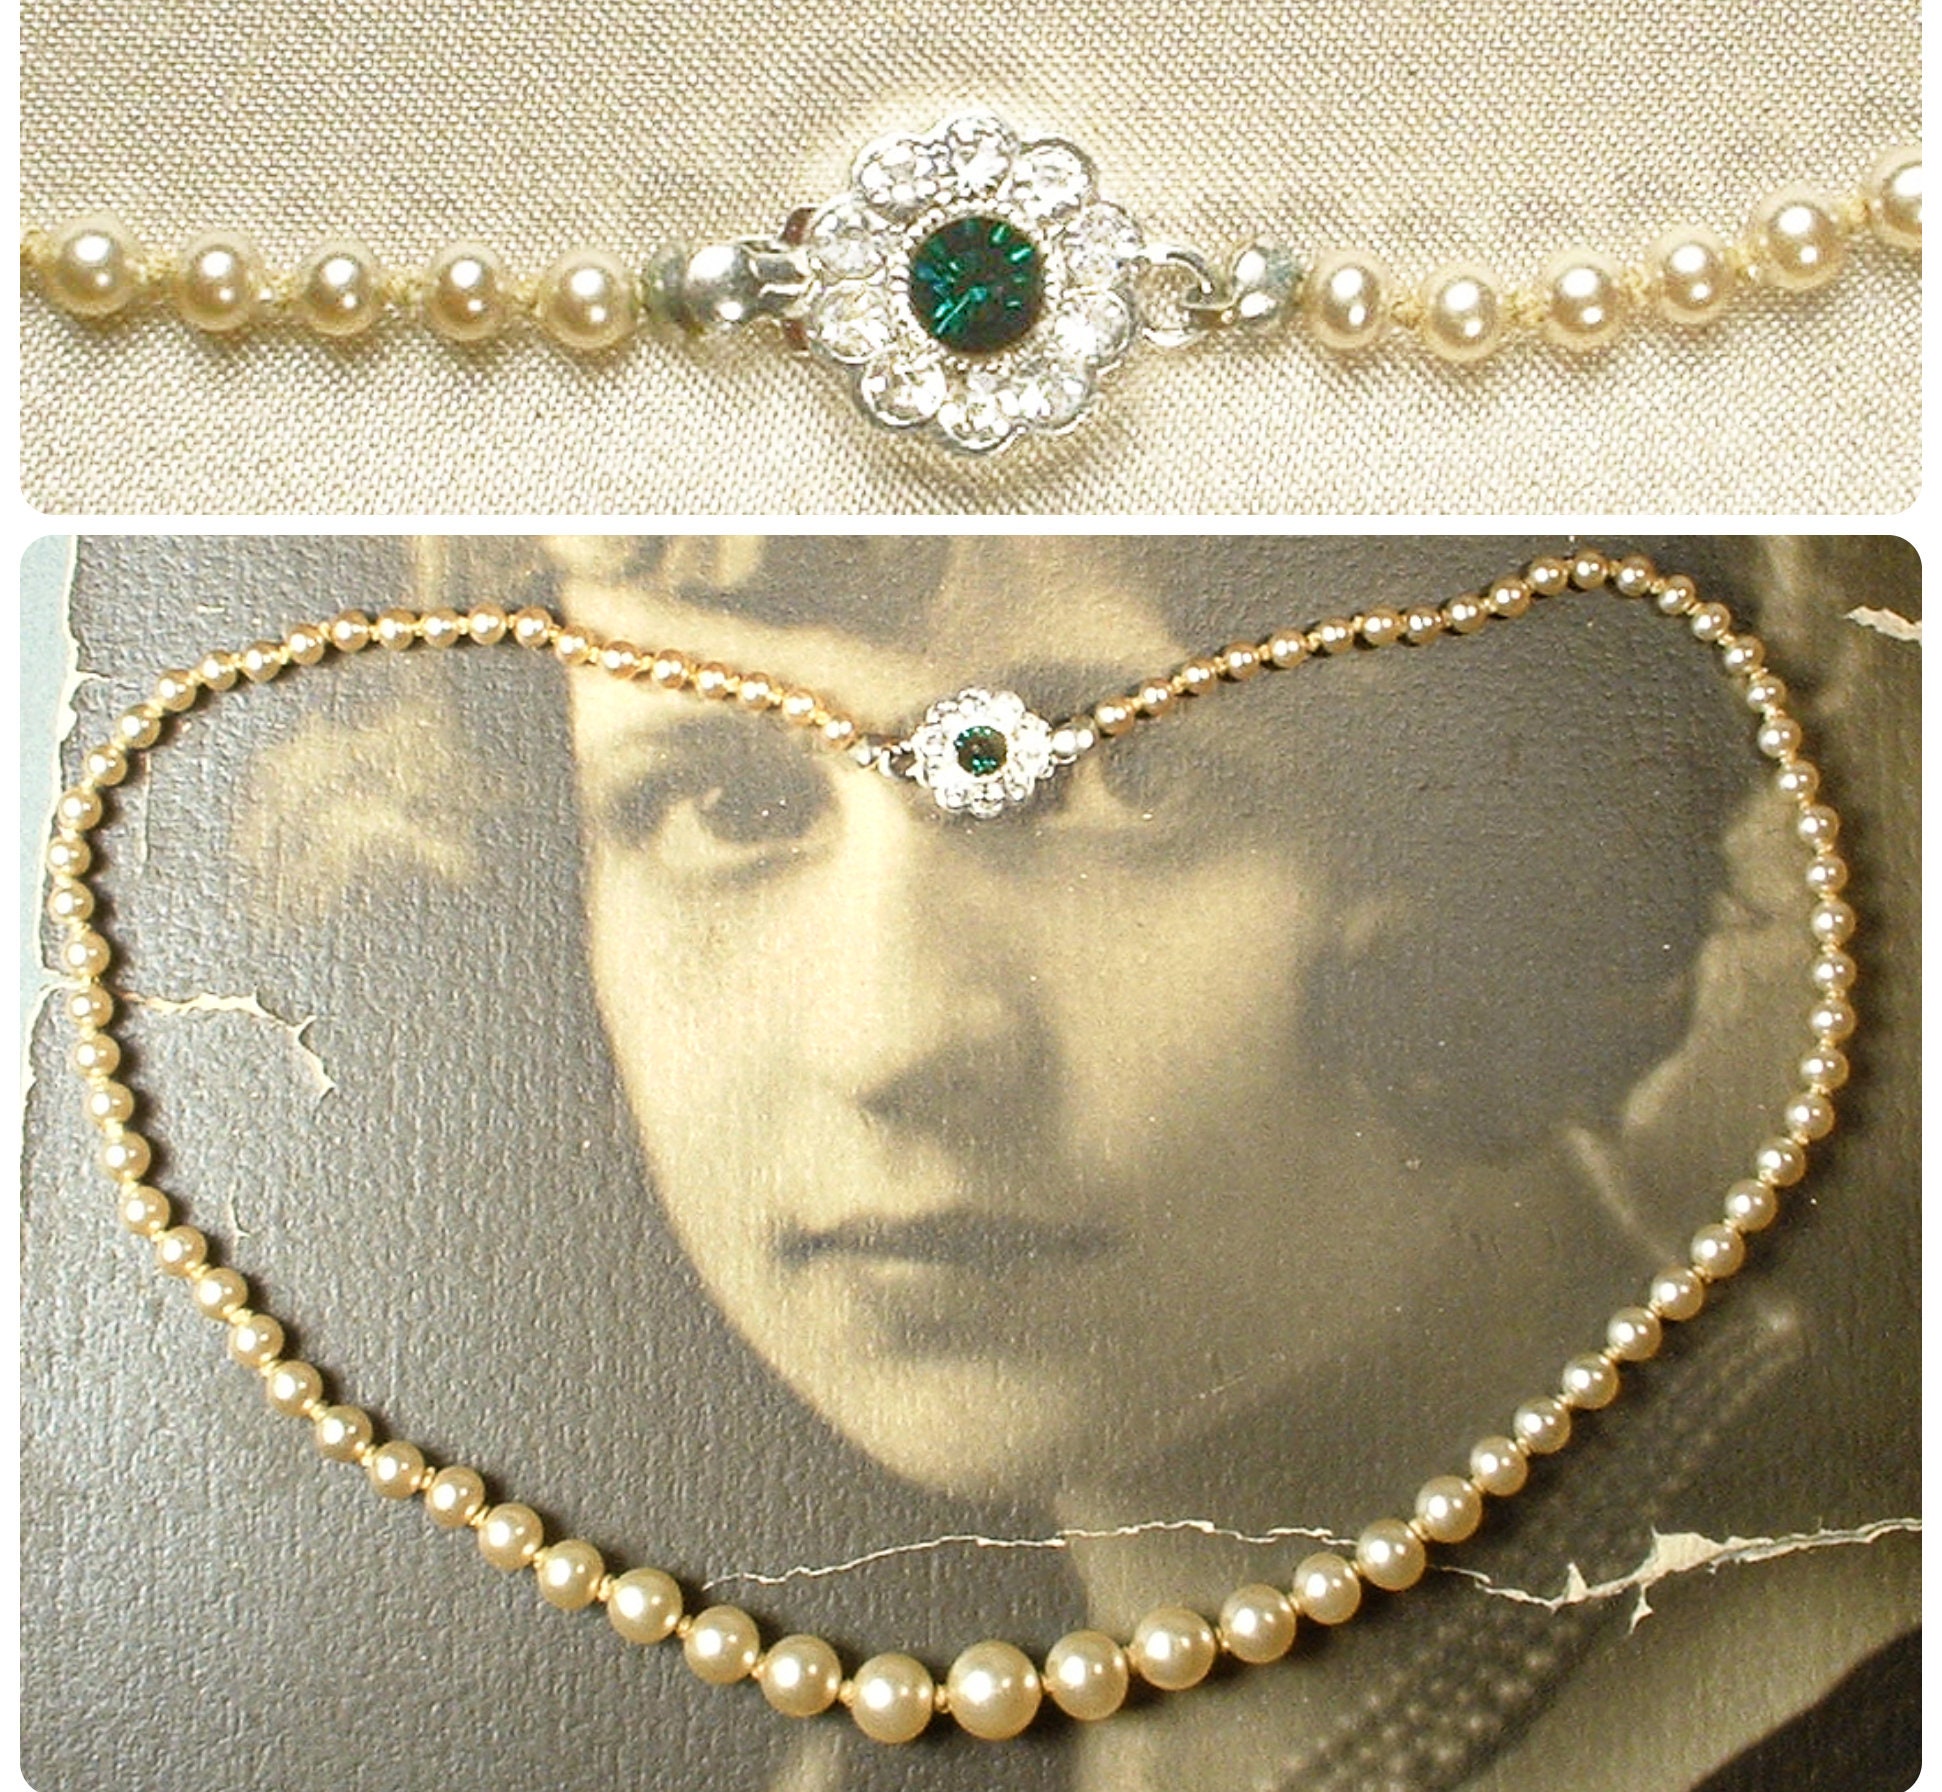 Vintage Pearl Necklace with Crystal Pendant EVERLASTING